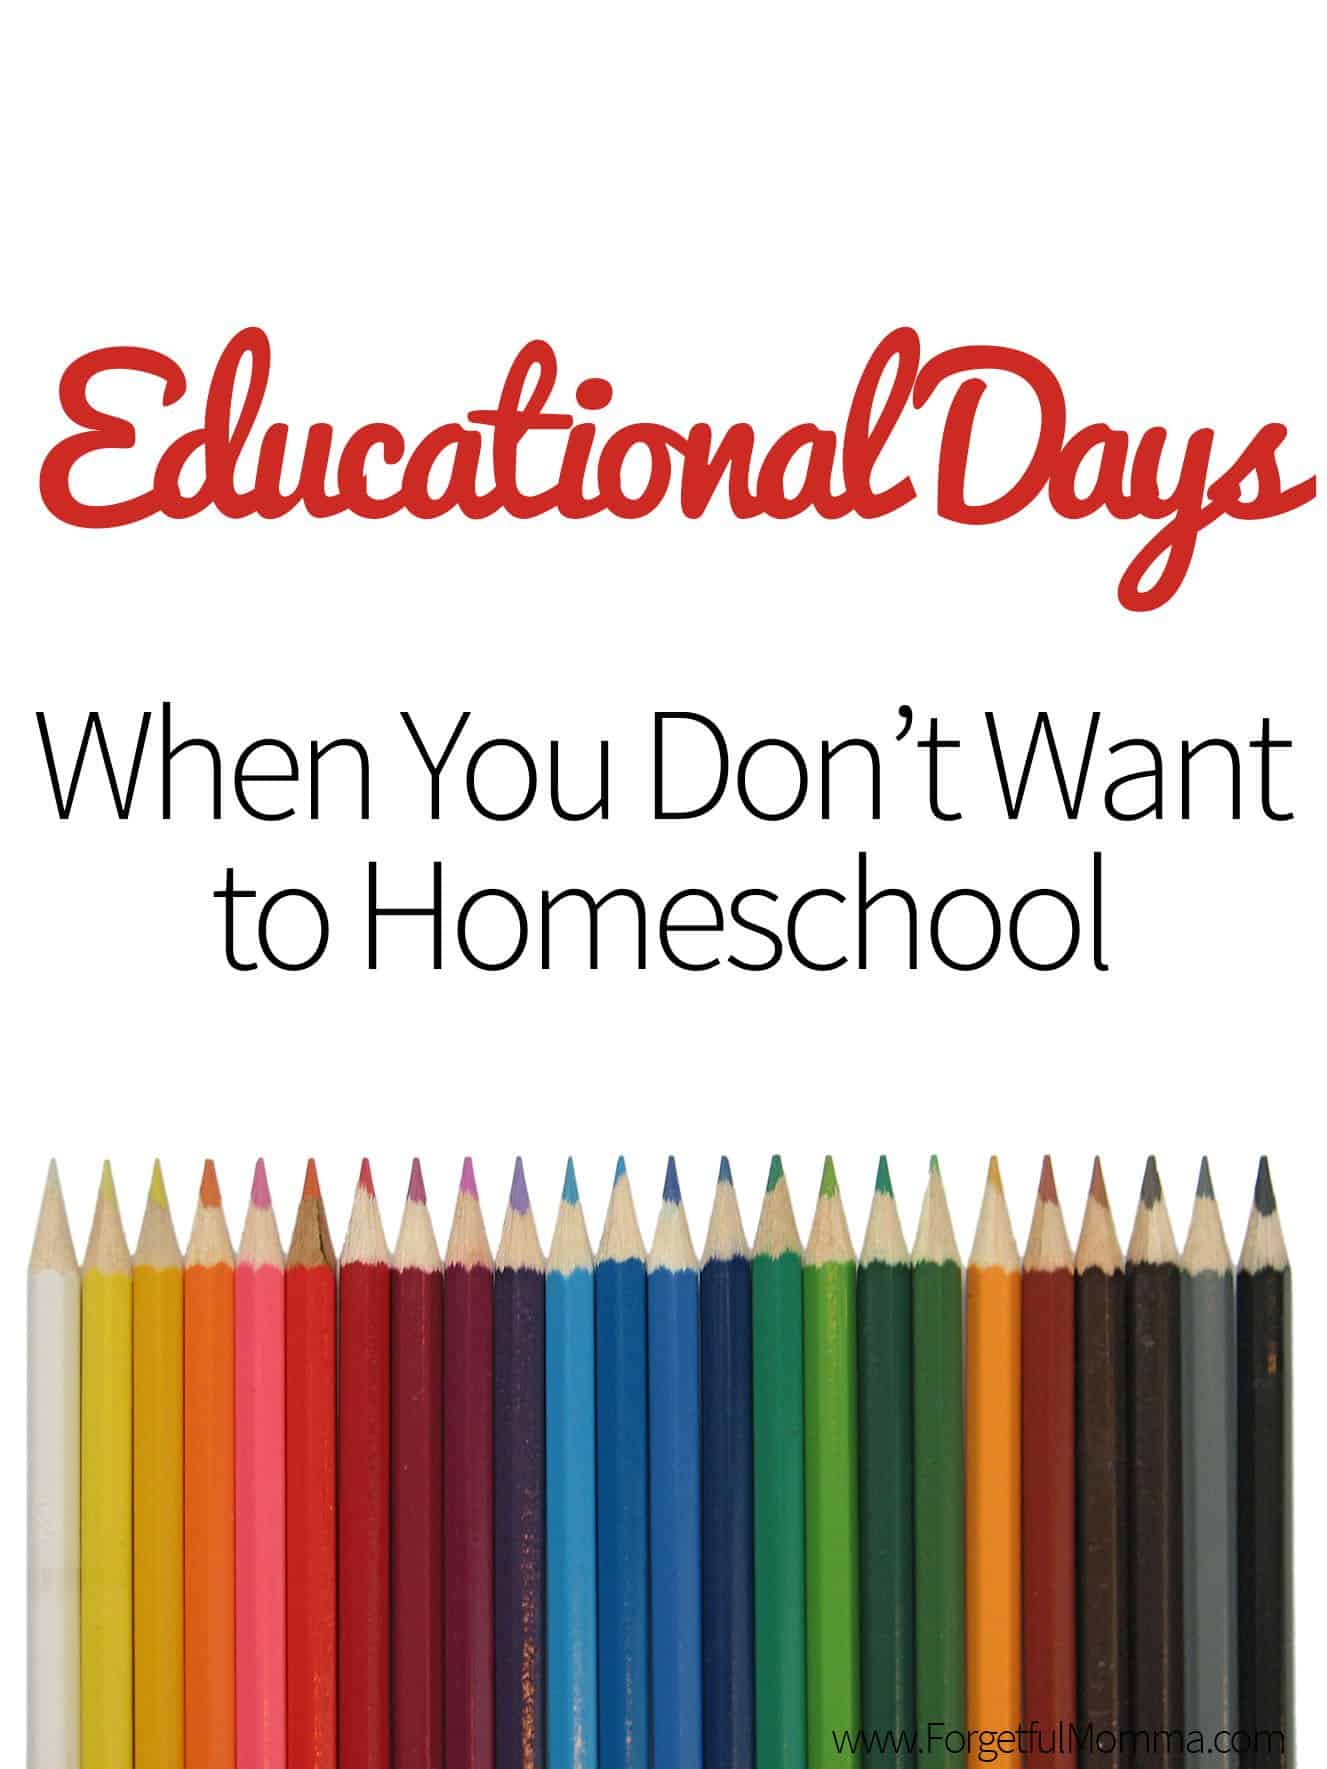 Educational Days When You Don’t Want to Homeschool